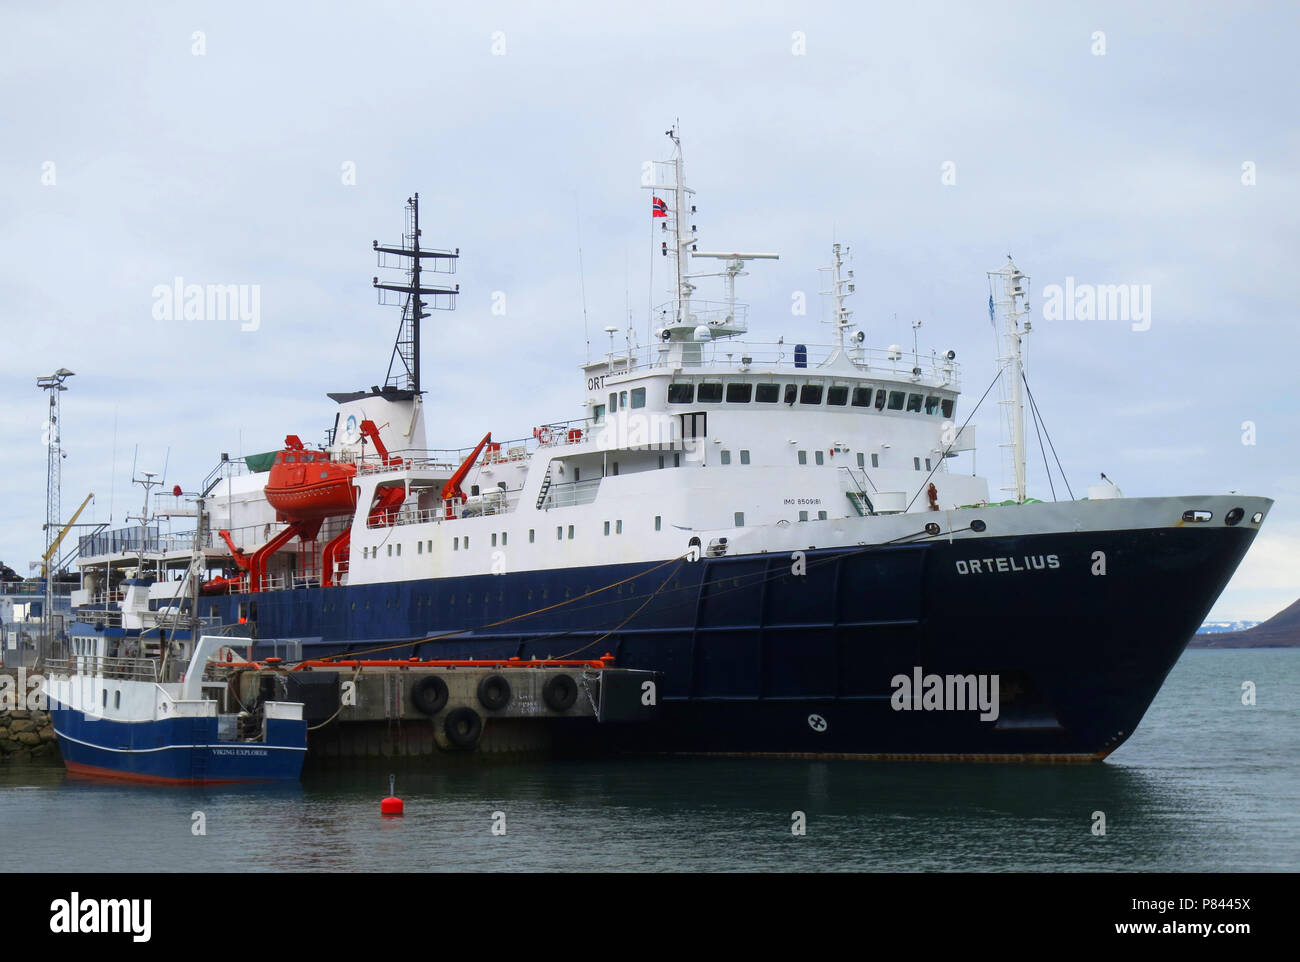 Expedition cruise ship Ortelius, Longyearbyen Svalbard ; Banque D'Images